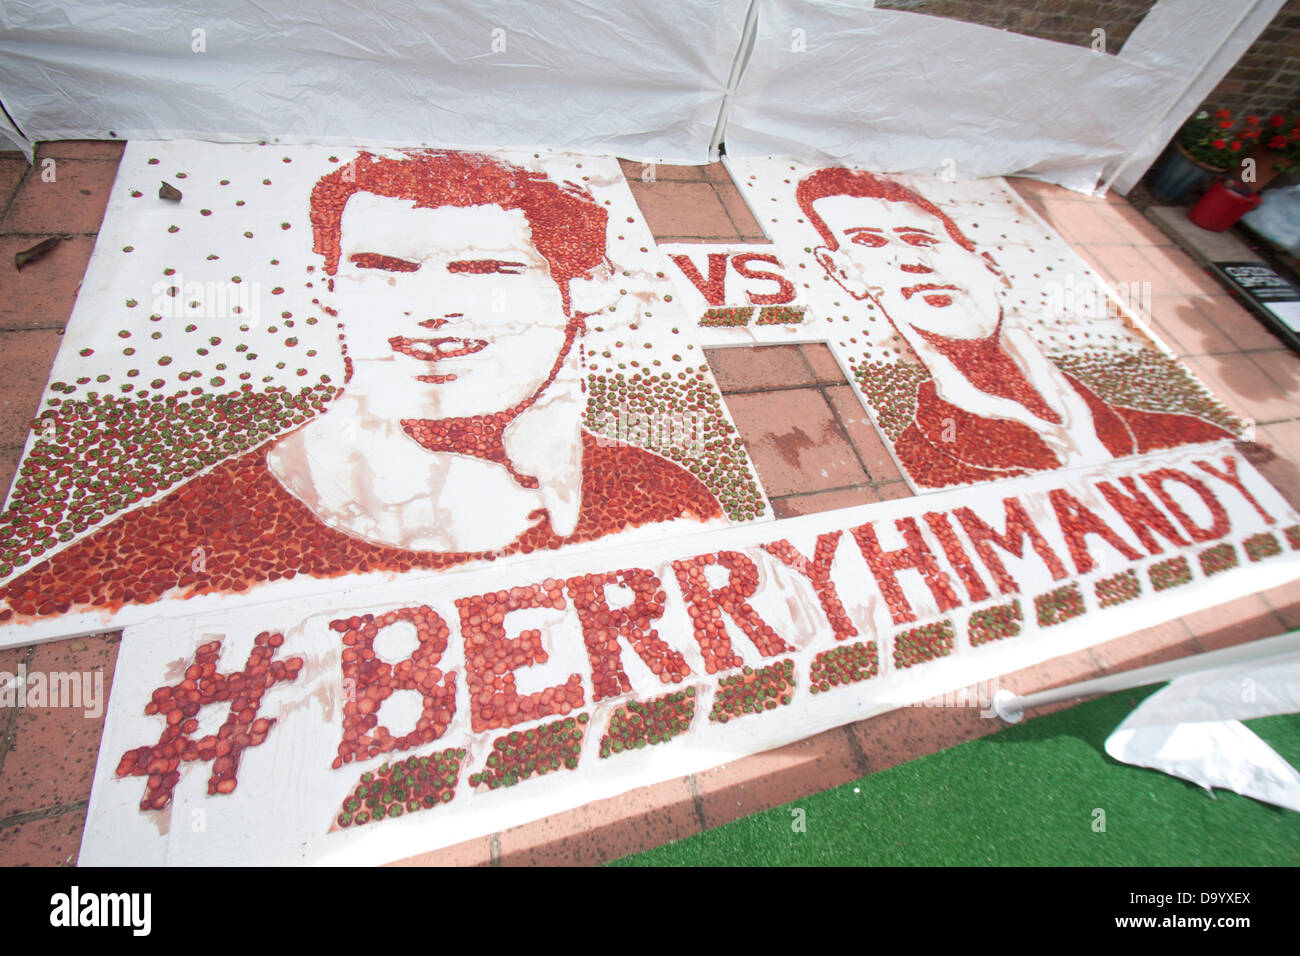 Wimbledon, London, UK. 29th June 2013. A Giant portrait of Andy Murray has been created out of strawberries and cream which also features the Serbian tennis player Novak Djokovic which is on display at the Curzon gallery in Wimbledon Credit:  amer ghazzal/Alamy Live News Stock Photo